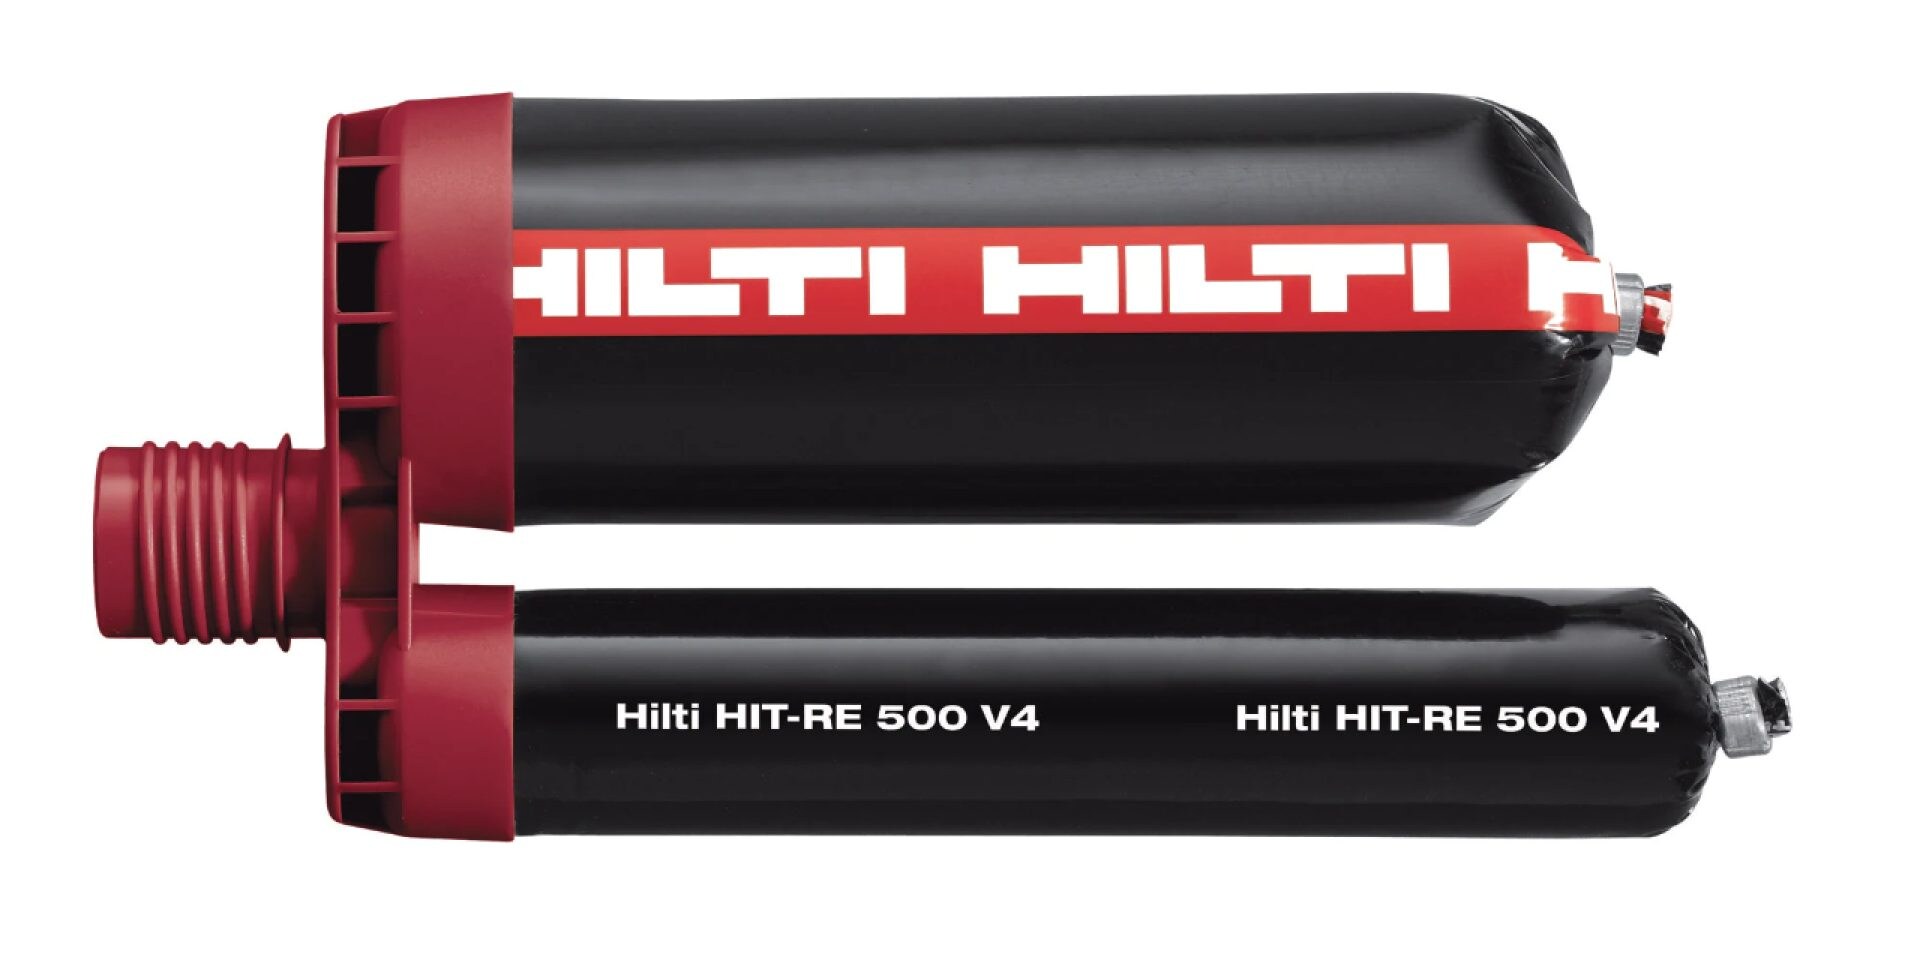 HIT-RE 500 V3 ultimate-performance epoxy mortar as part of the Hilti SafeSet system